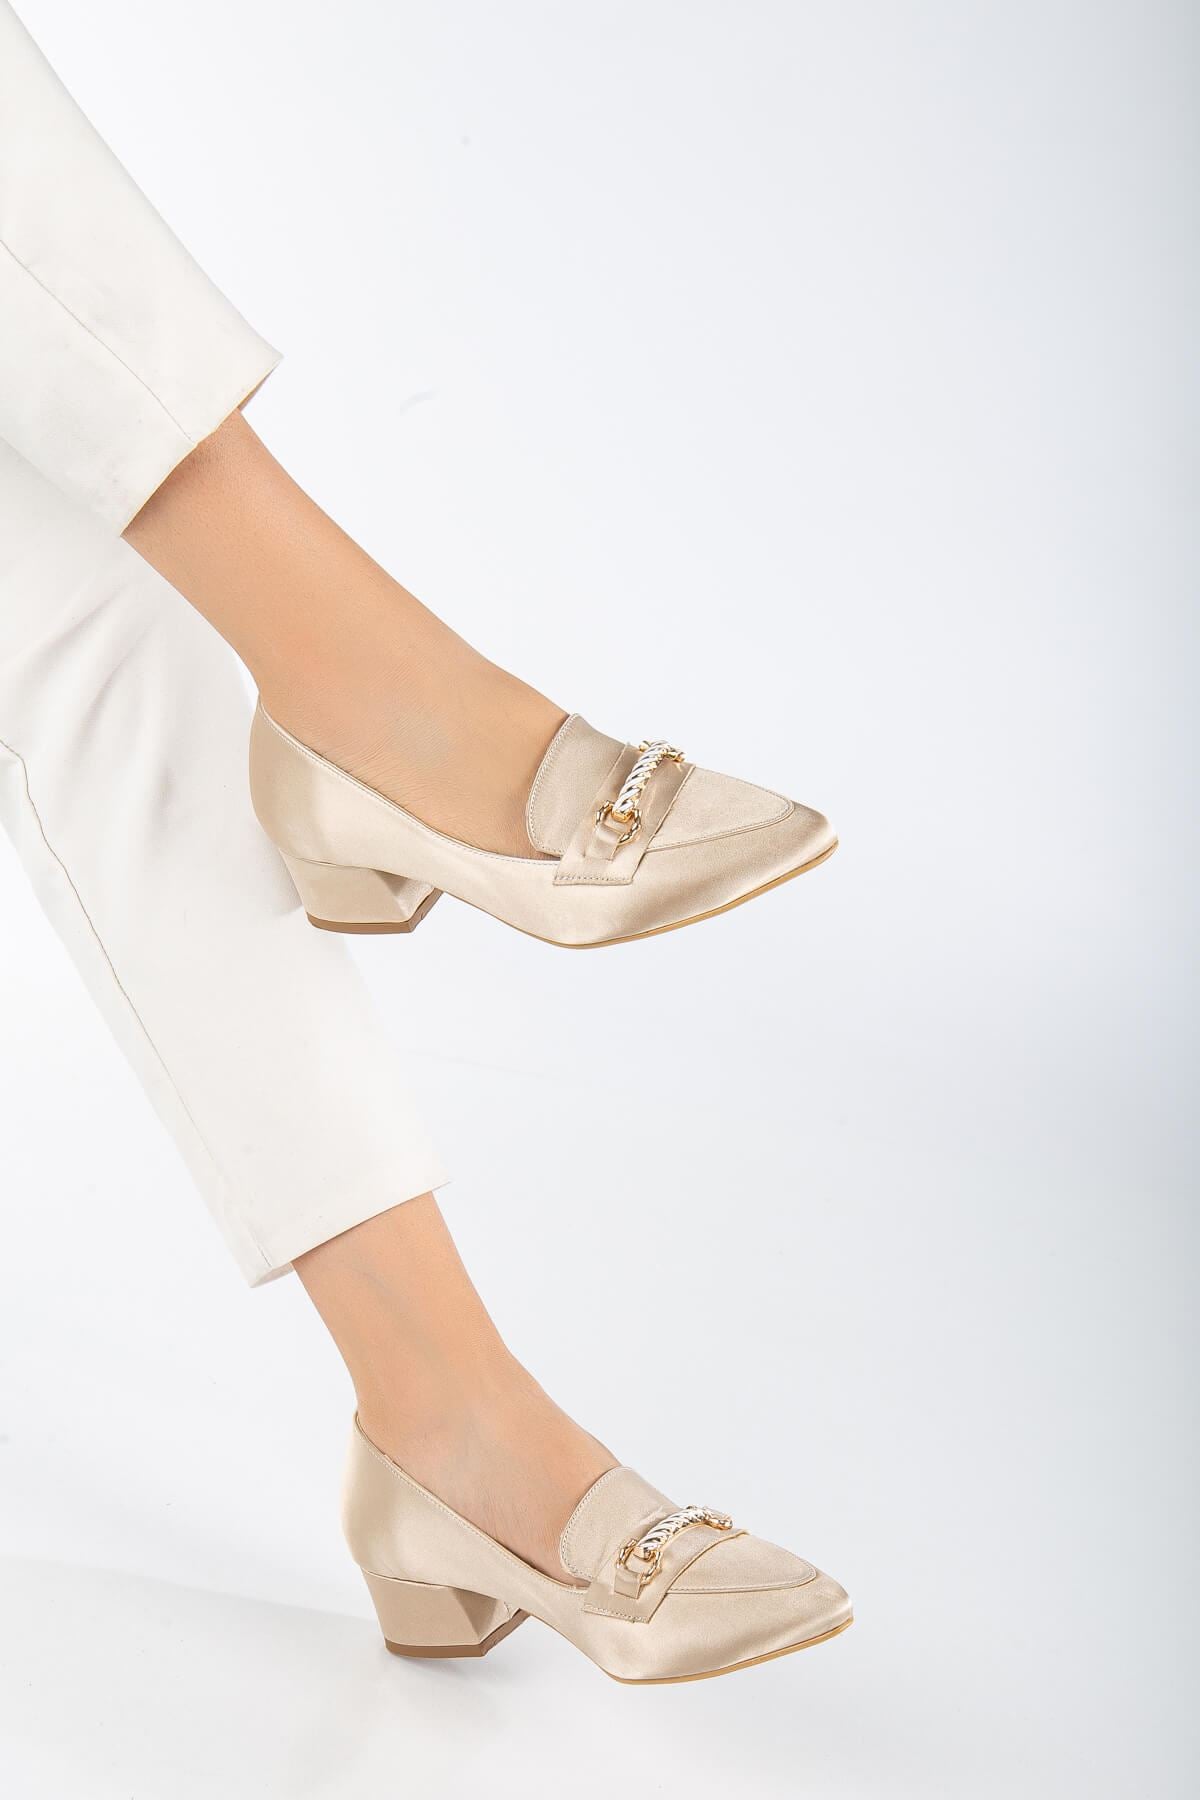 Cream Satin Buckle Detailed Women's Low Heeled Shoes - STREETMODE ™